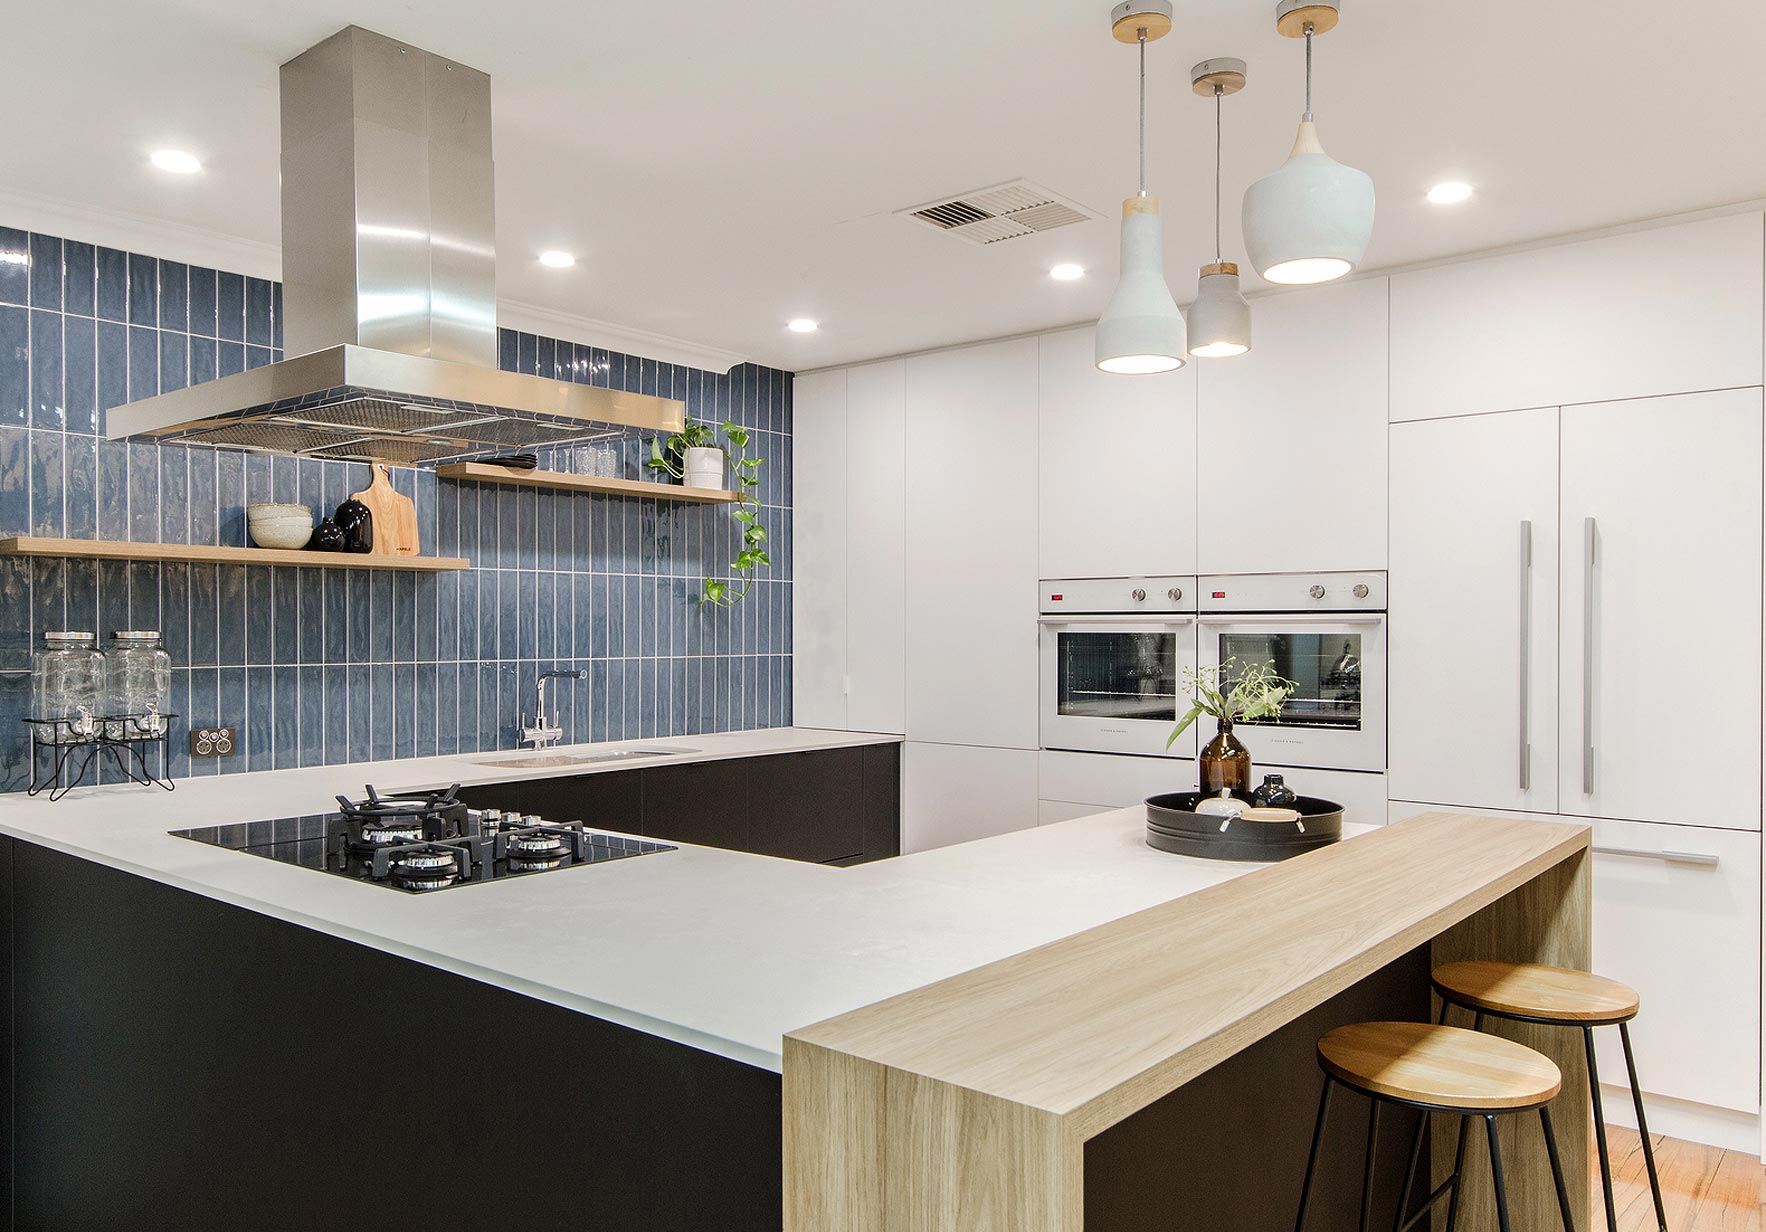 What Factors to Consider When Renovating a Kitchen